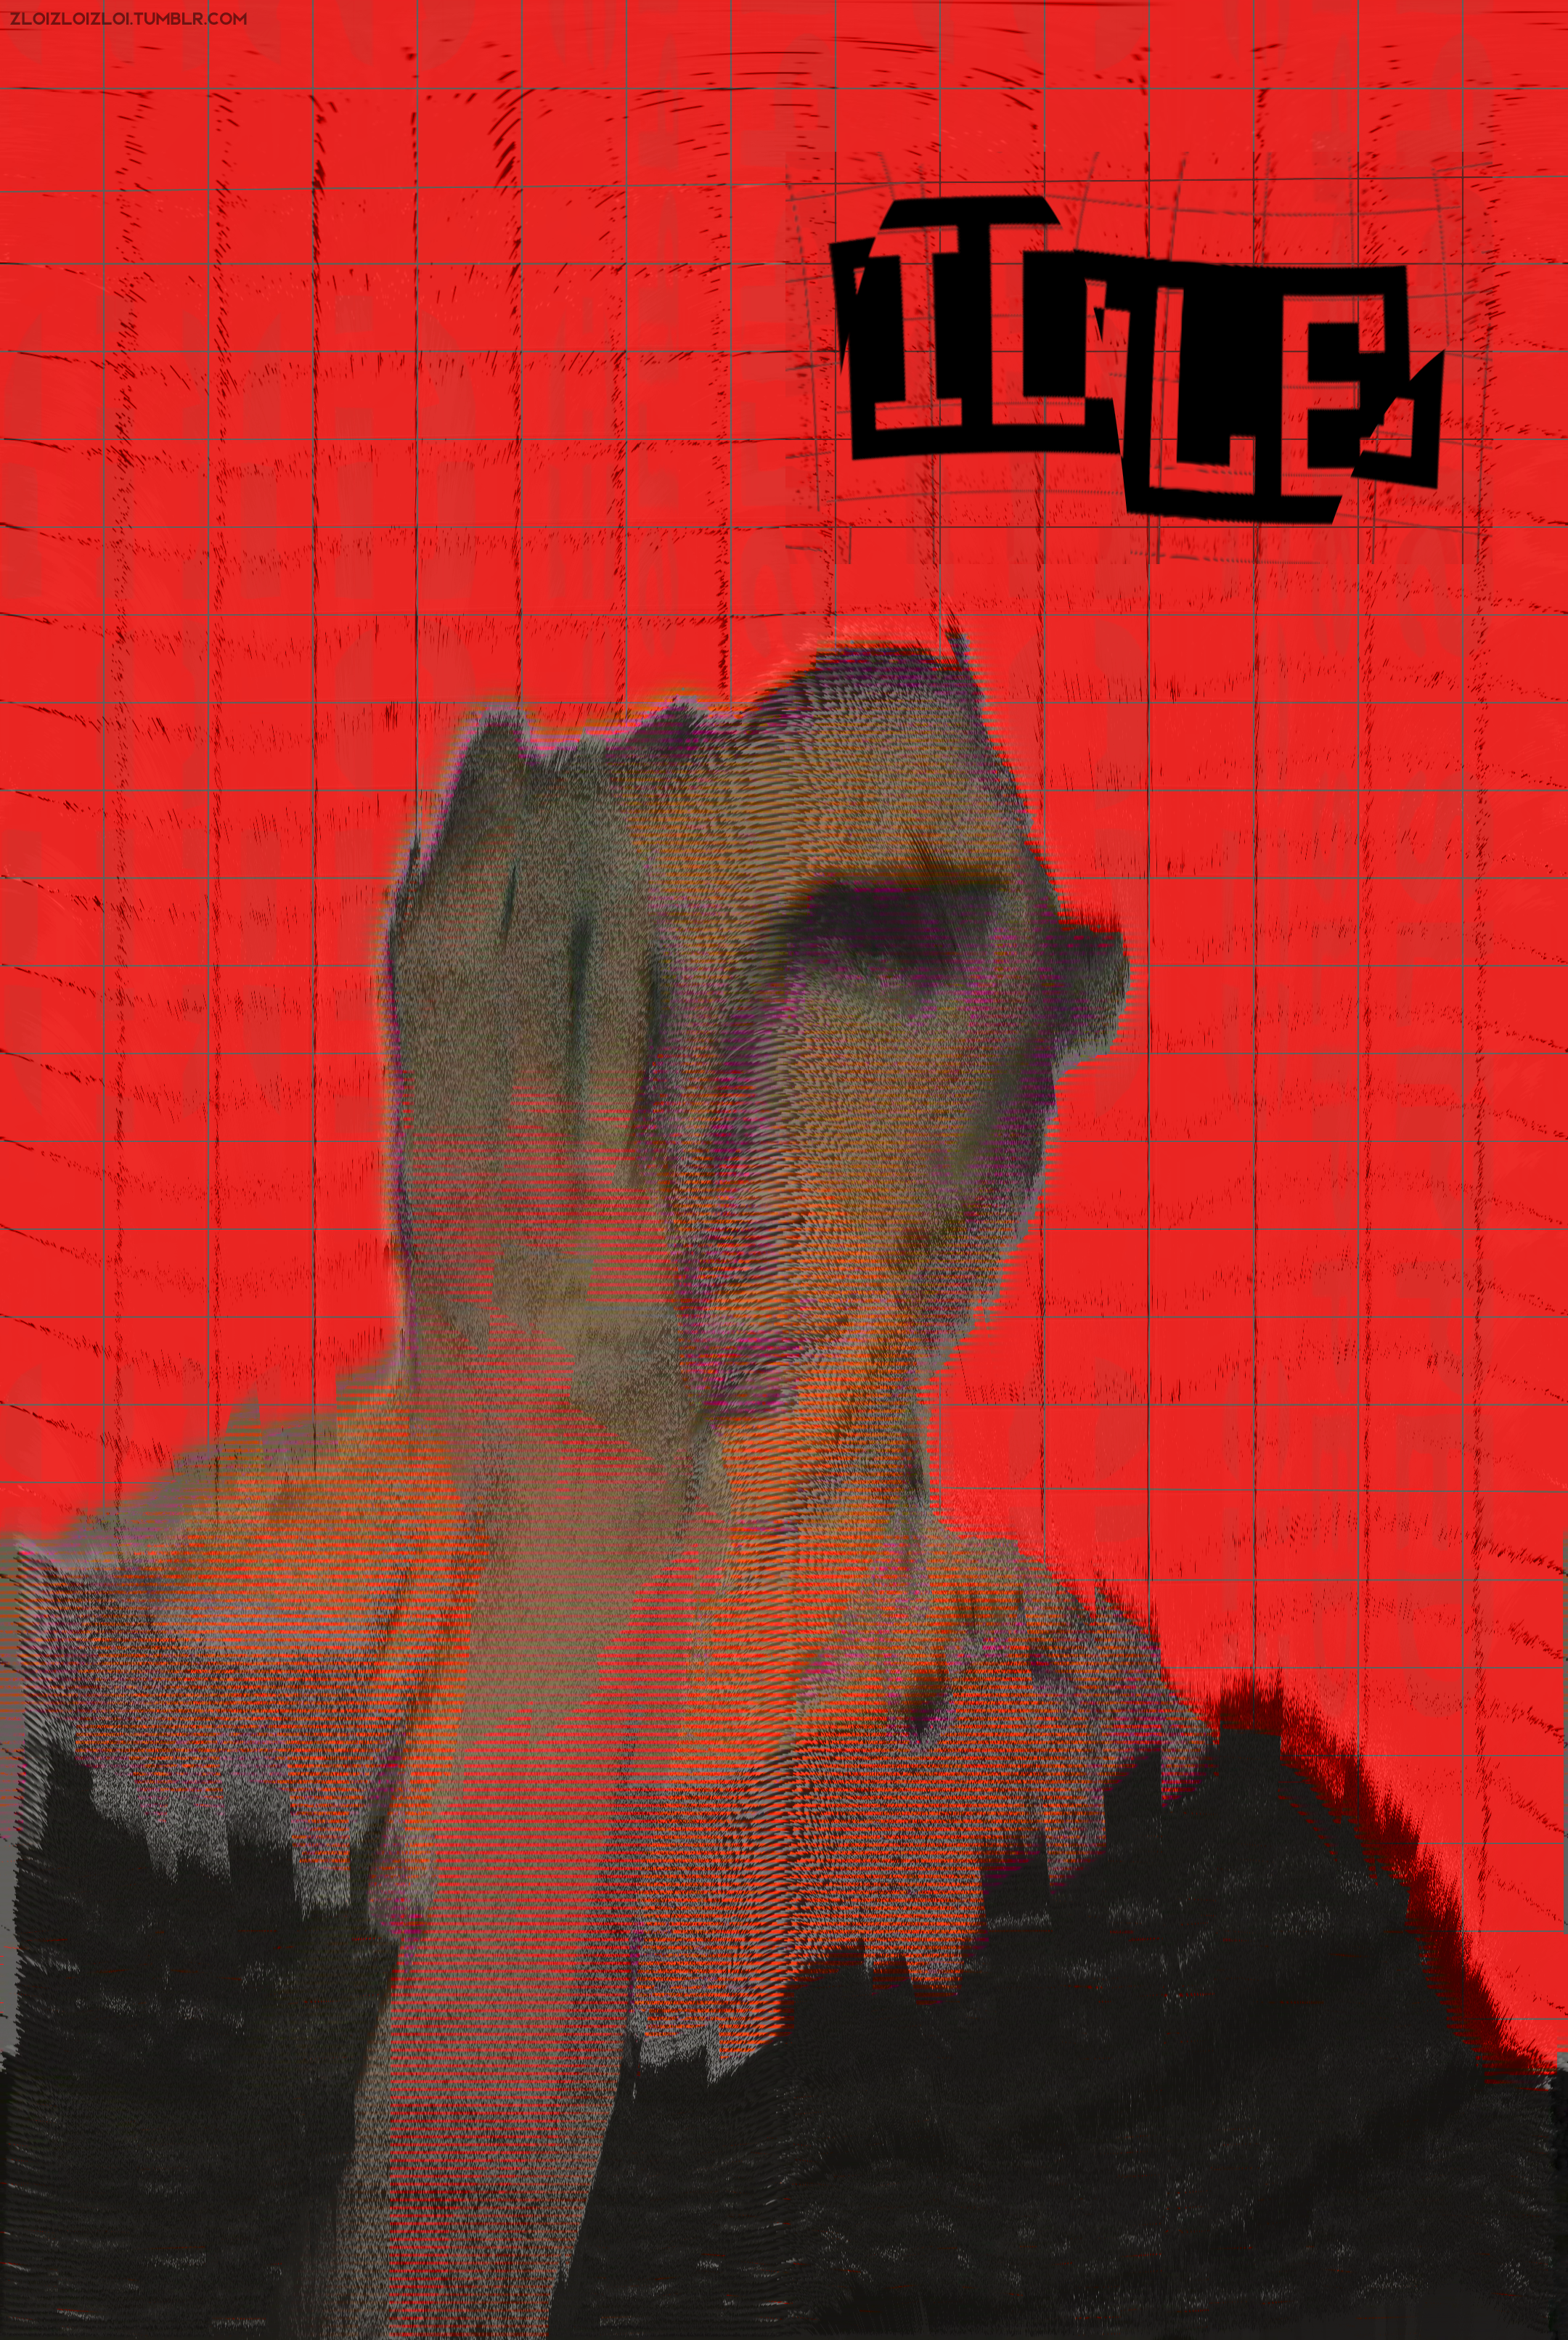 General 2160x3223 glitch art abstract surreal red background